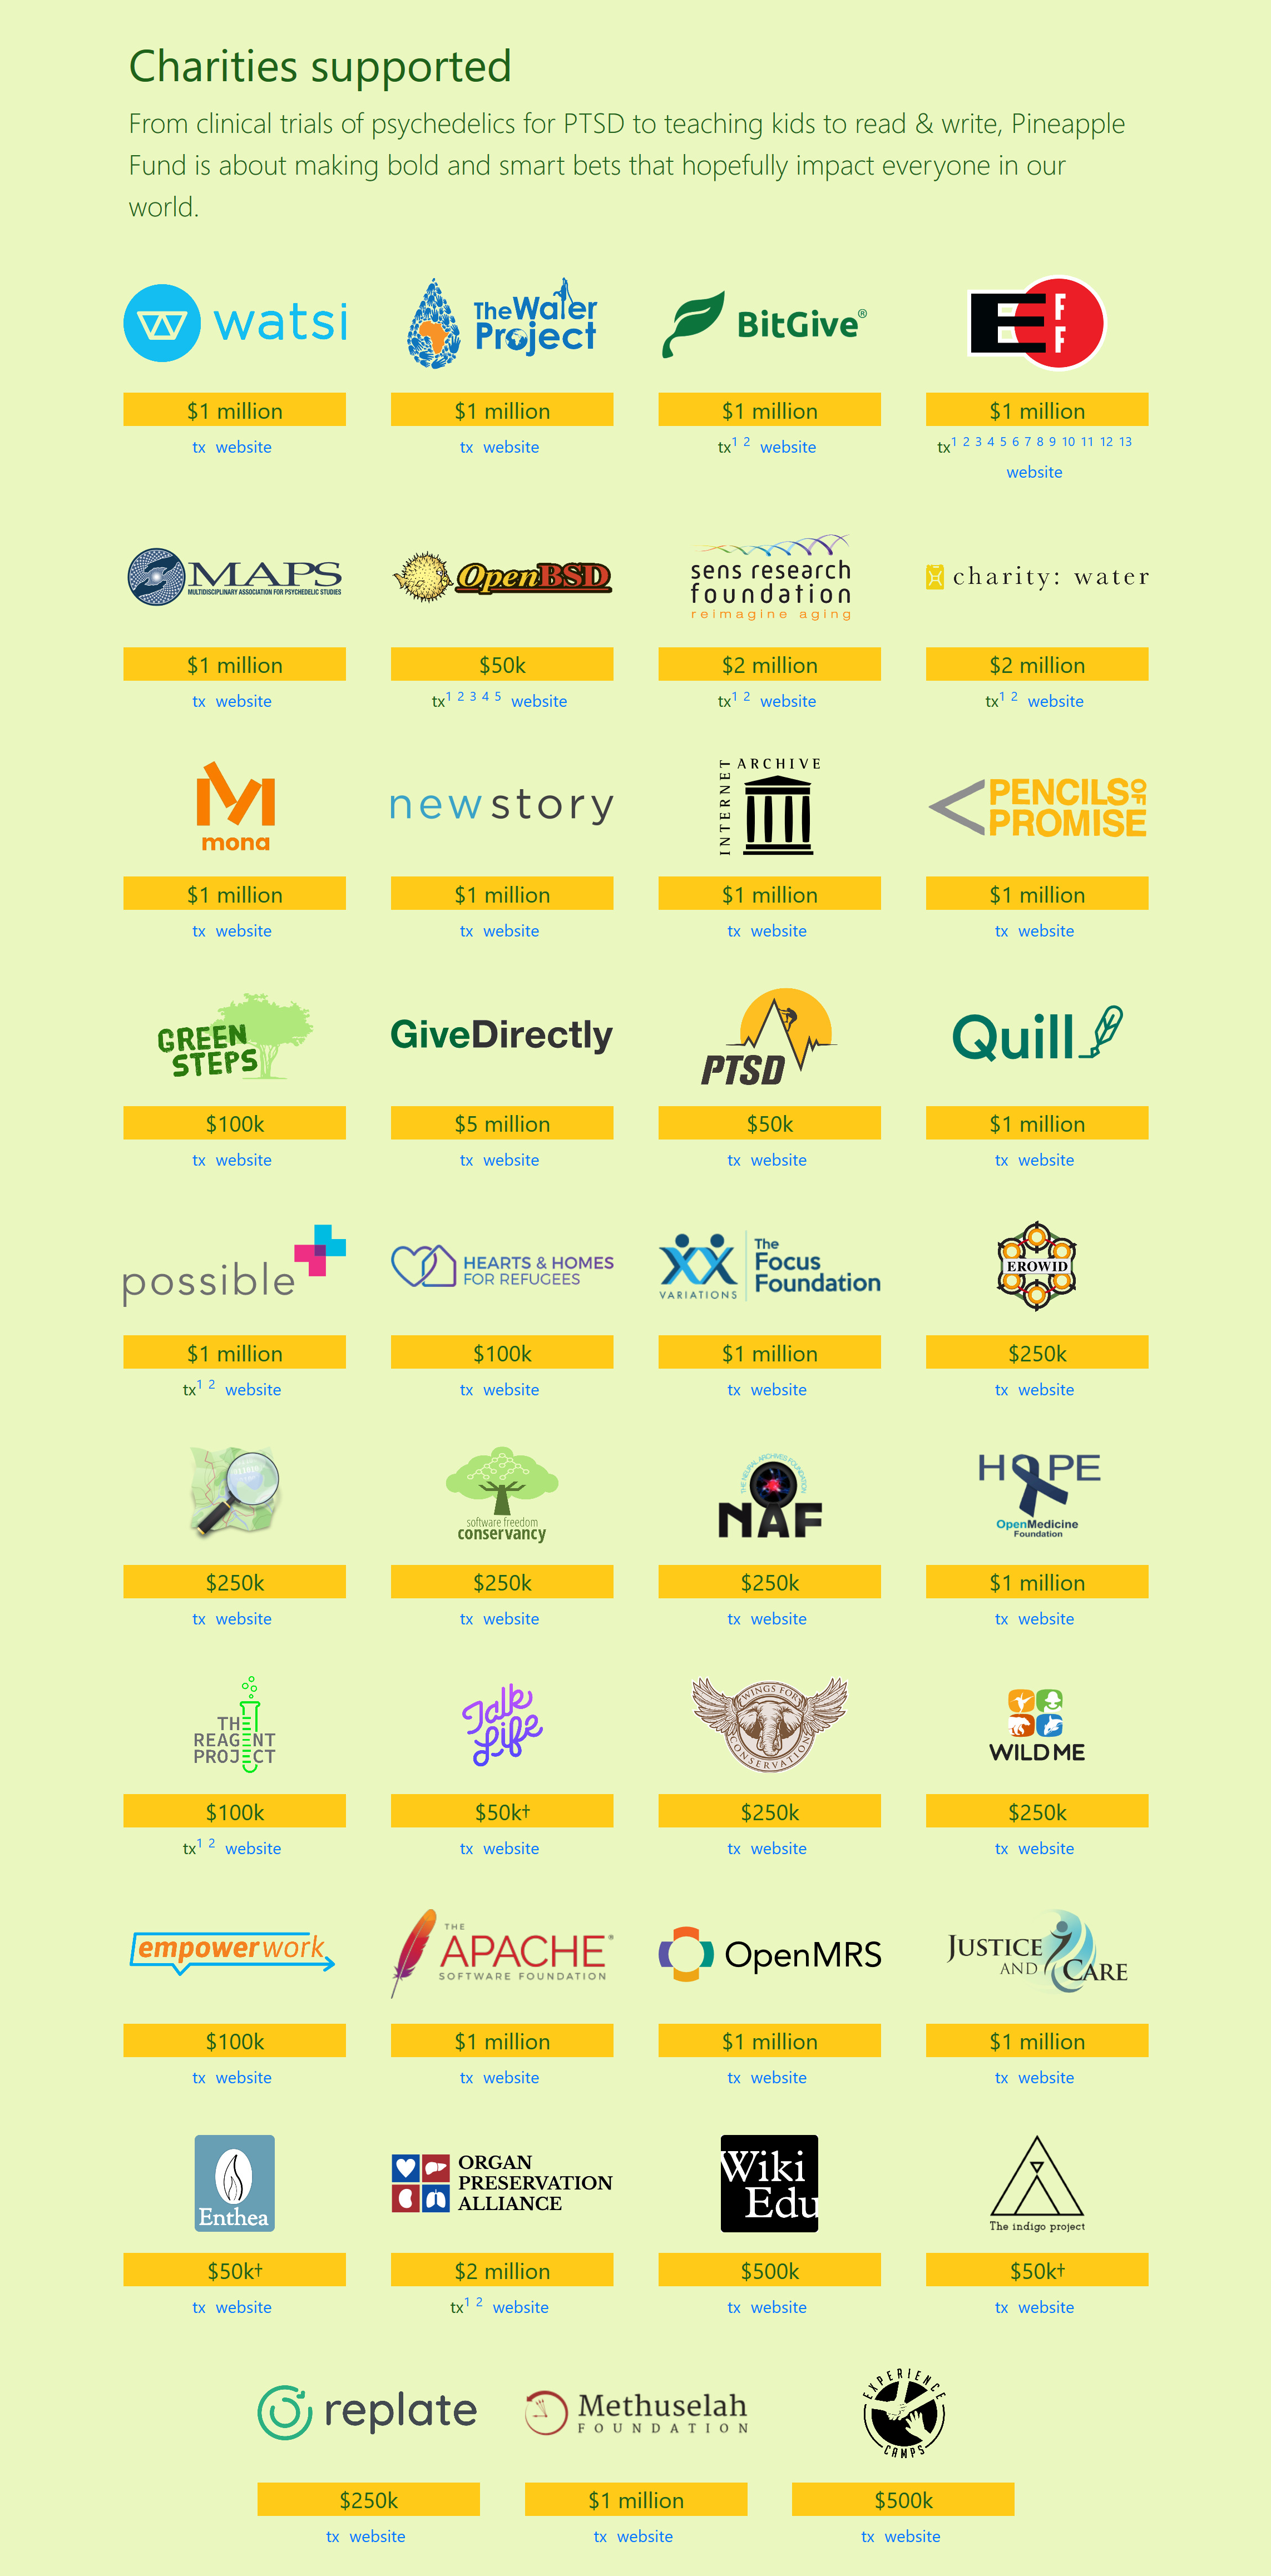 Organizations supported by the Pineapple Fund as of January 28, 2018